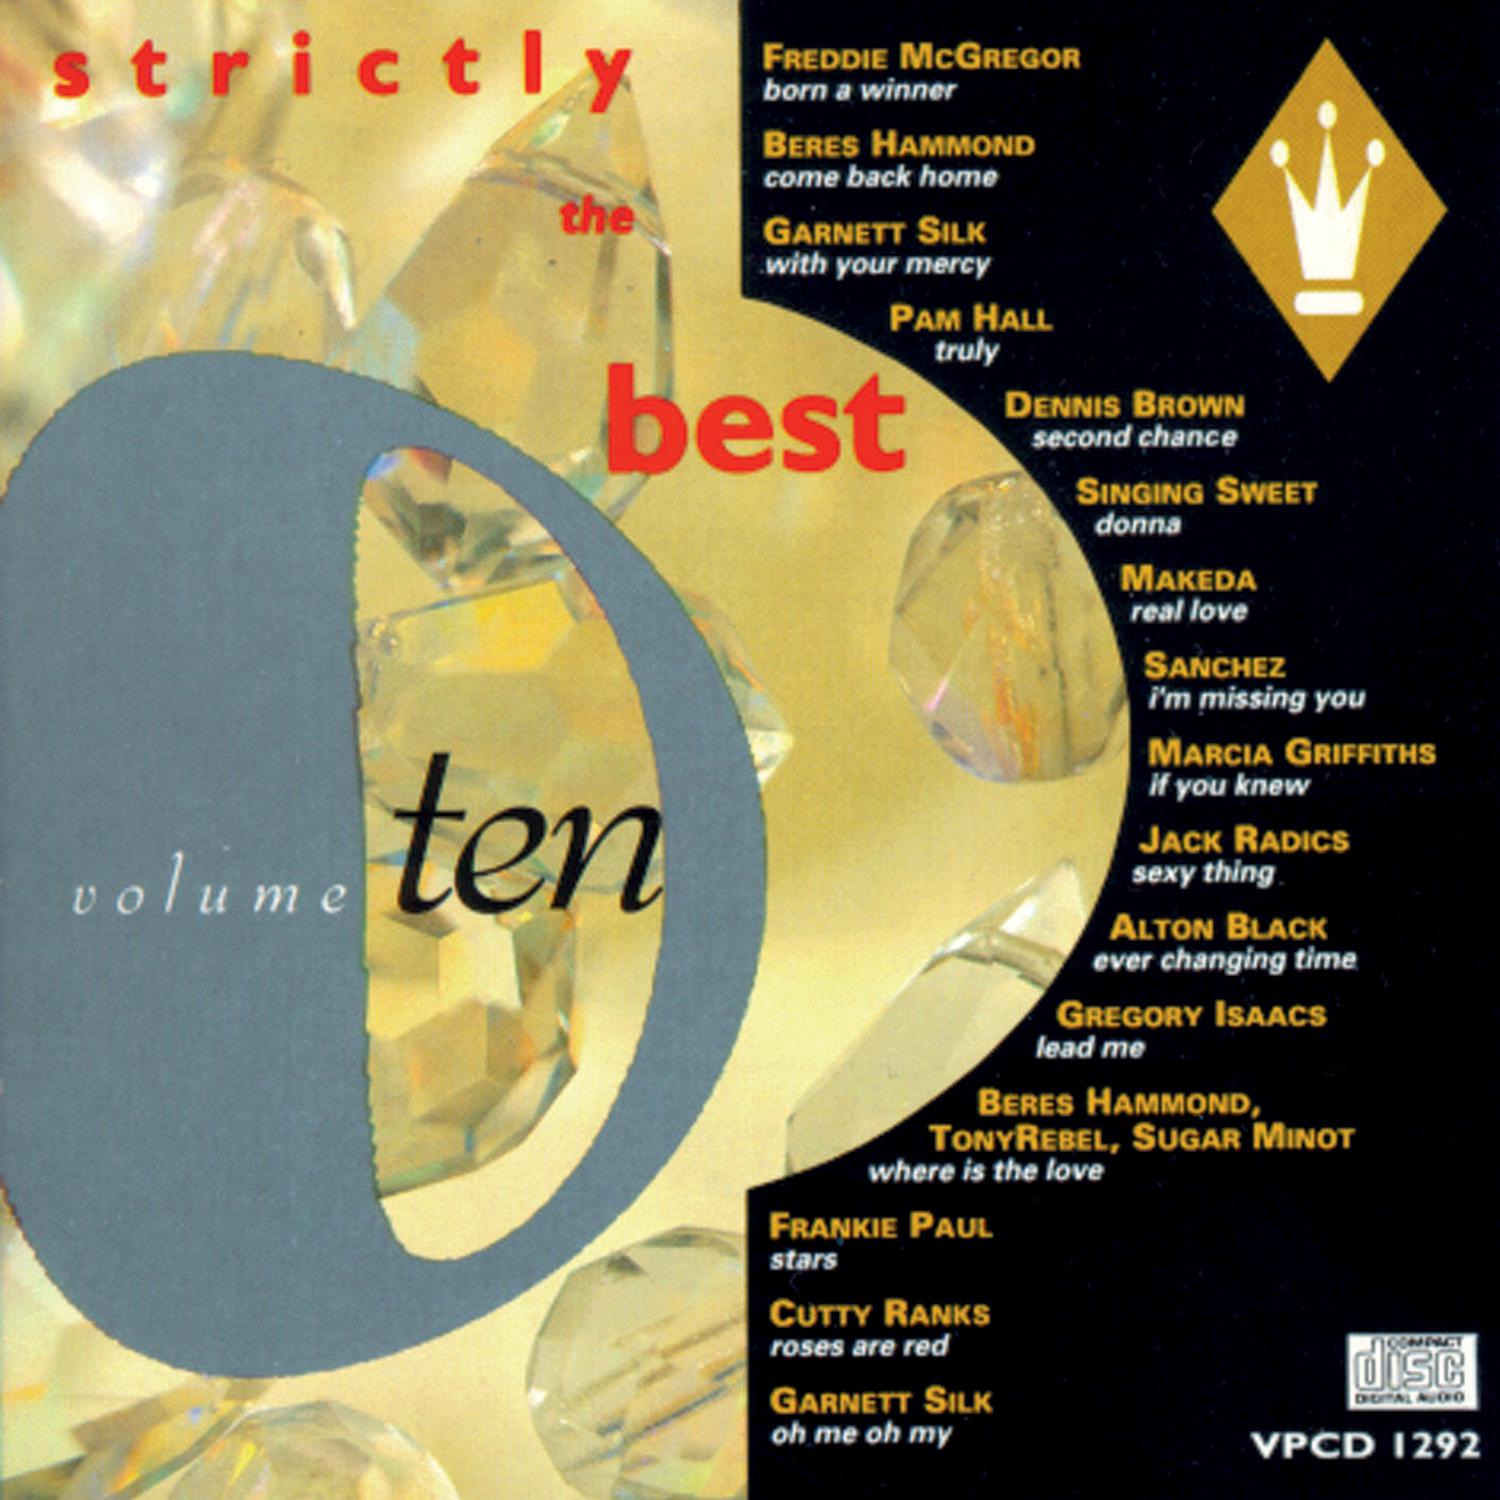 Strictly The Best Vol.10